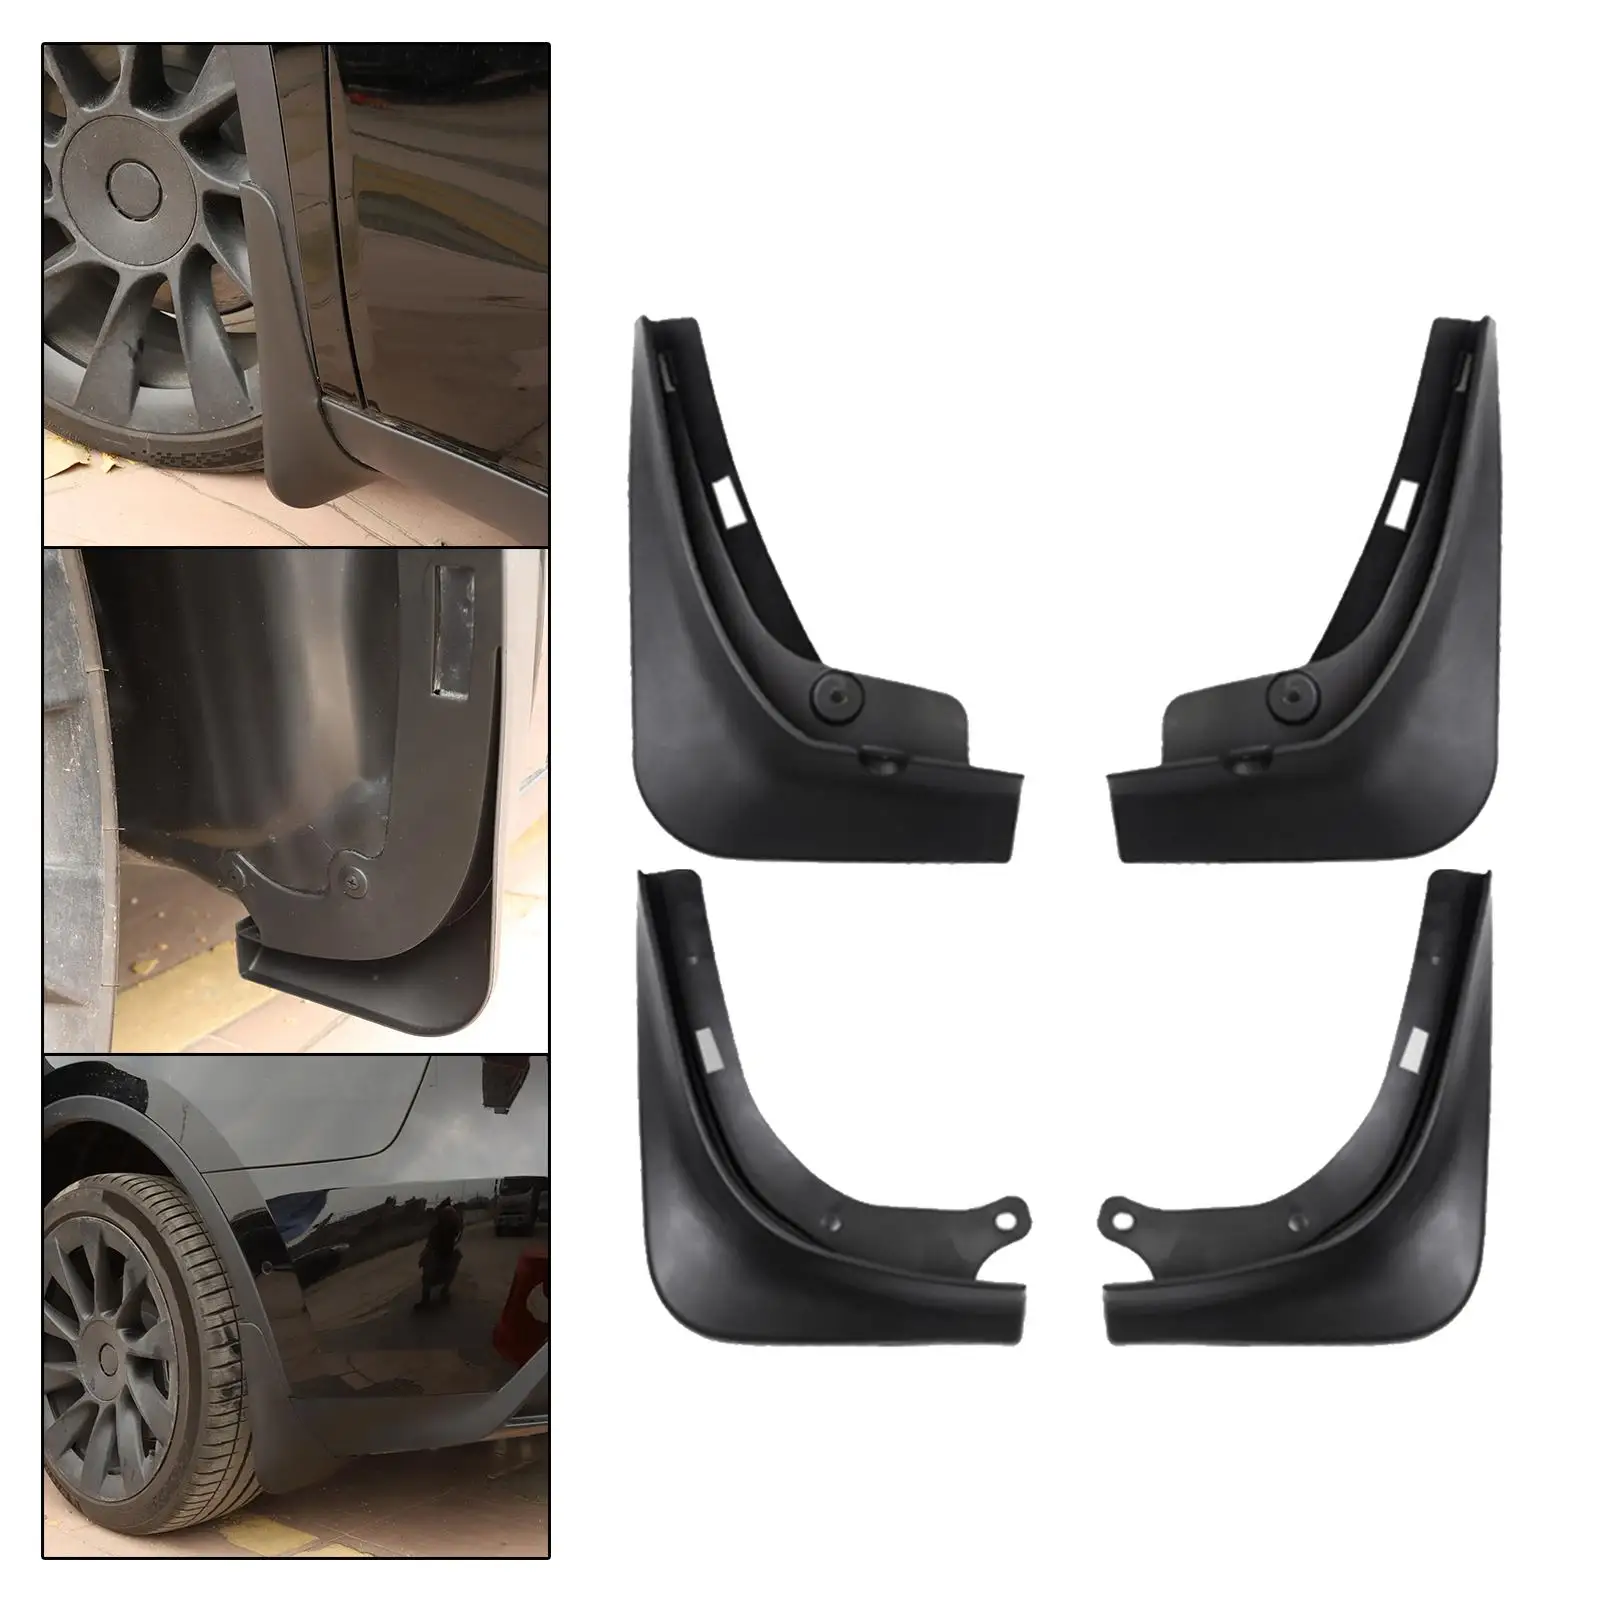 Car Wheel Mud Flaps  for  No Need Drilling Holes